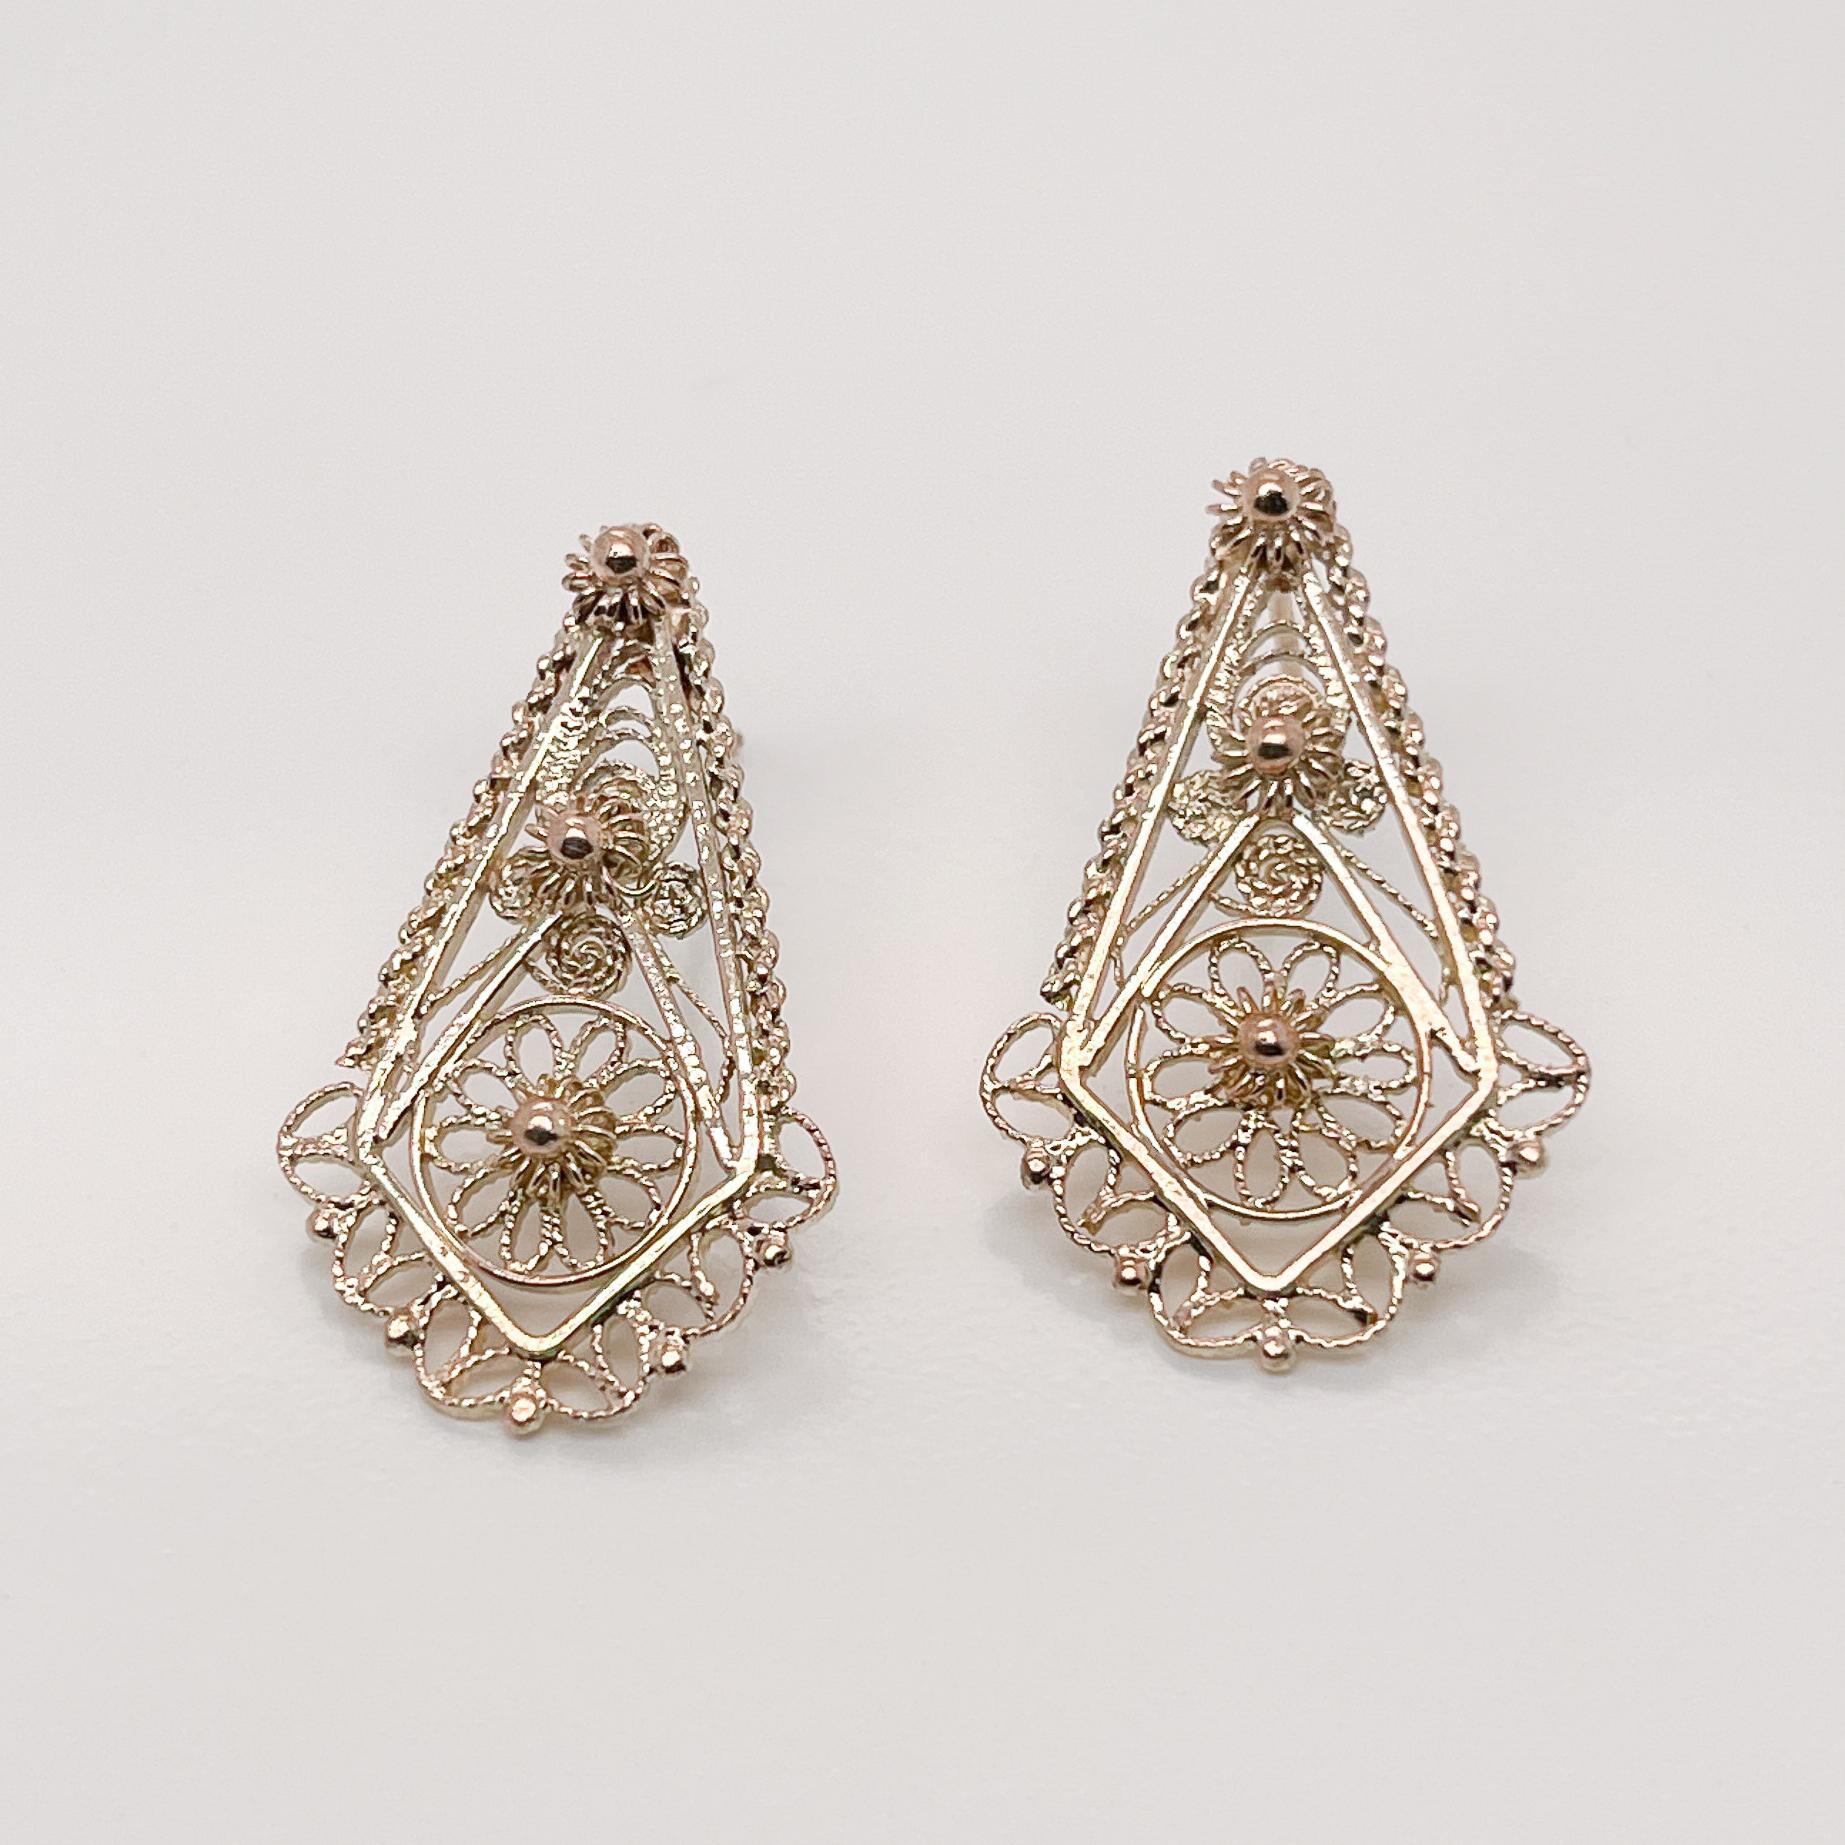 A pair of very fine 14k gold earrings.

With delicate gold filigree work in stylized floral designs in the Etruscan Revival style.

Simply lovely earrings!

Overall Condition:
They are in overall good, as-pictured, used estate condition with some